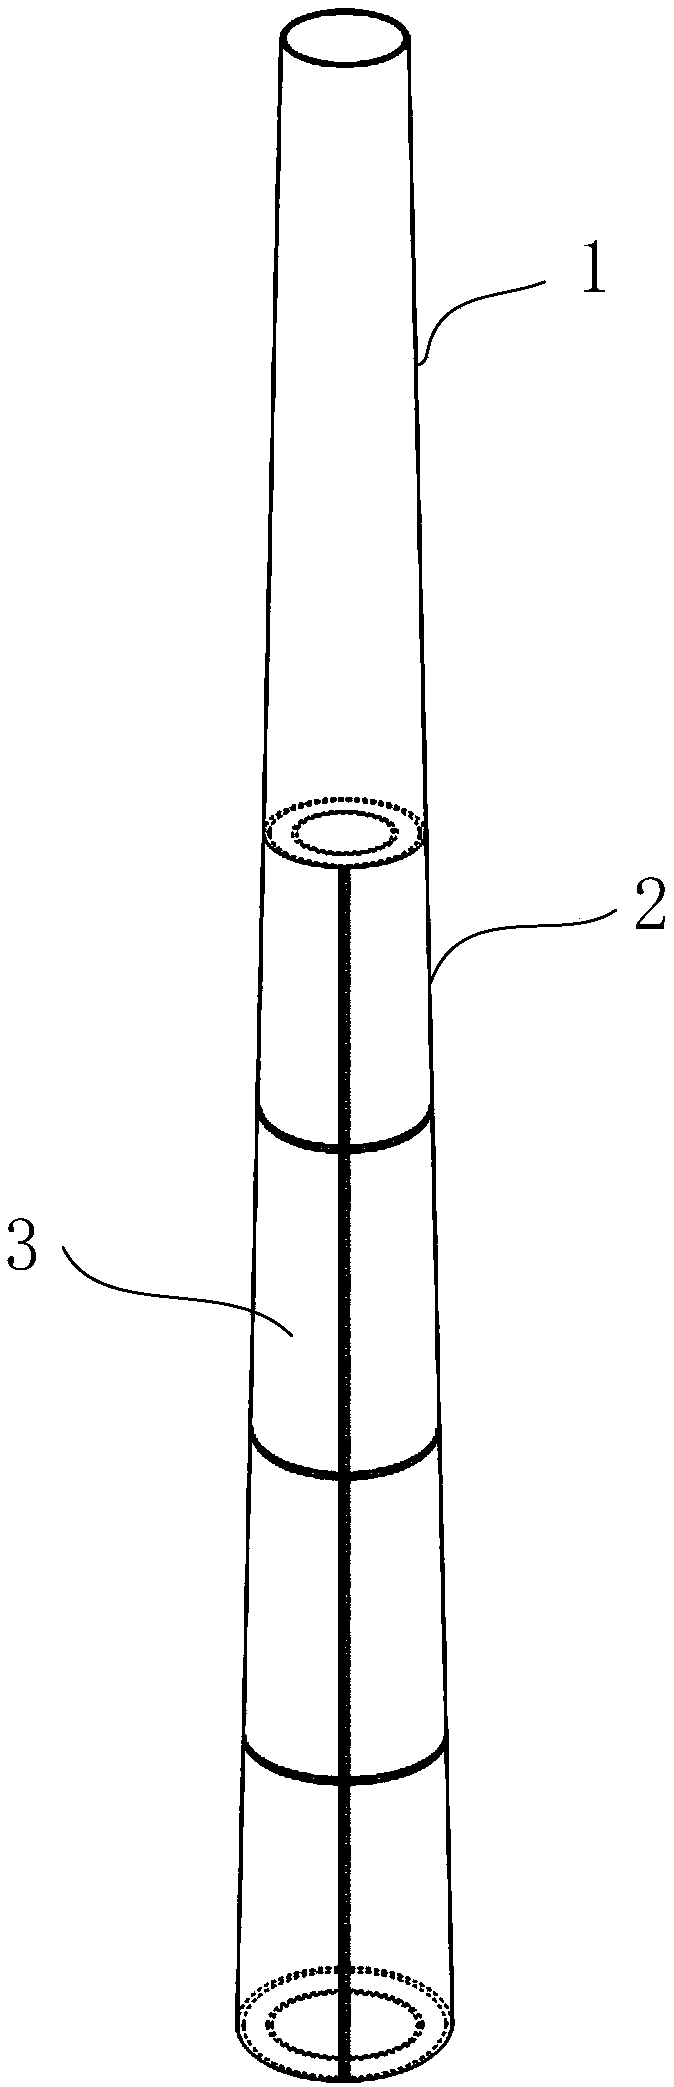 Wind power mixing tower barrel based on edge stiffening combined shell